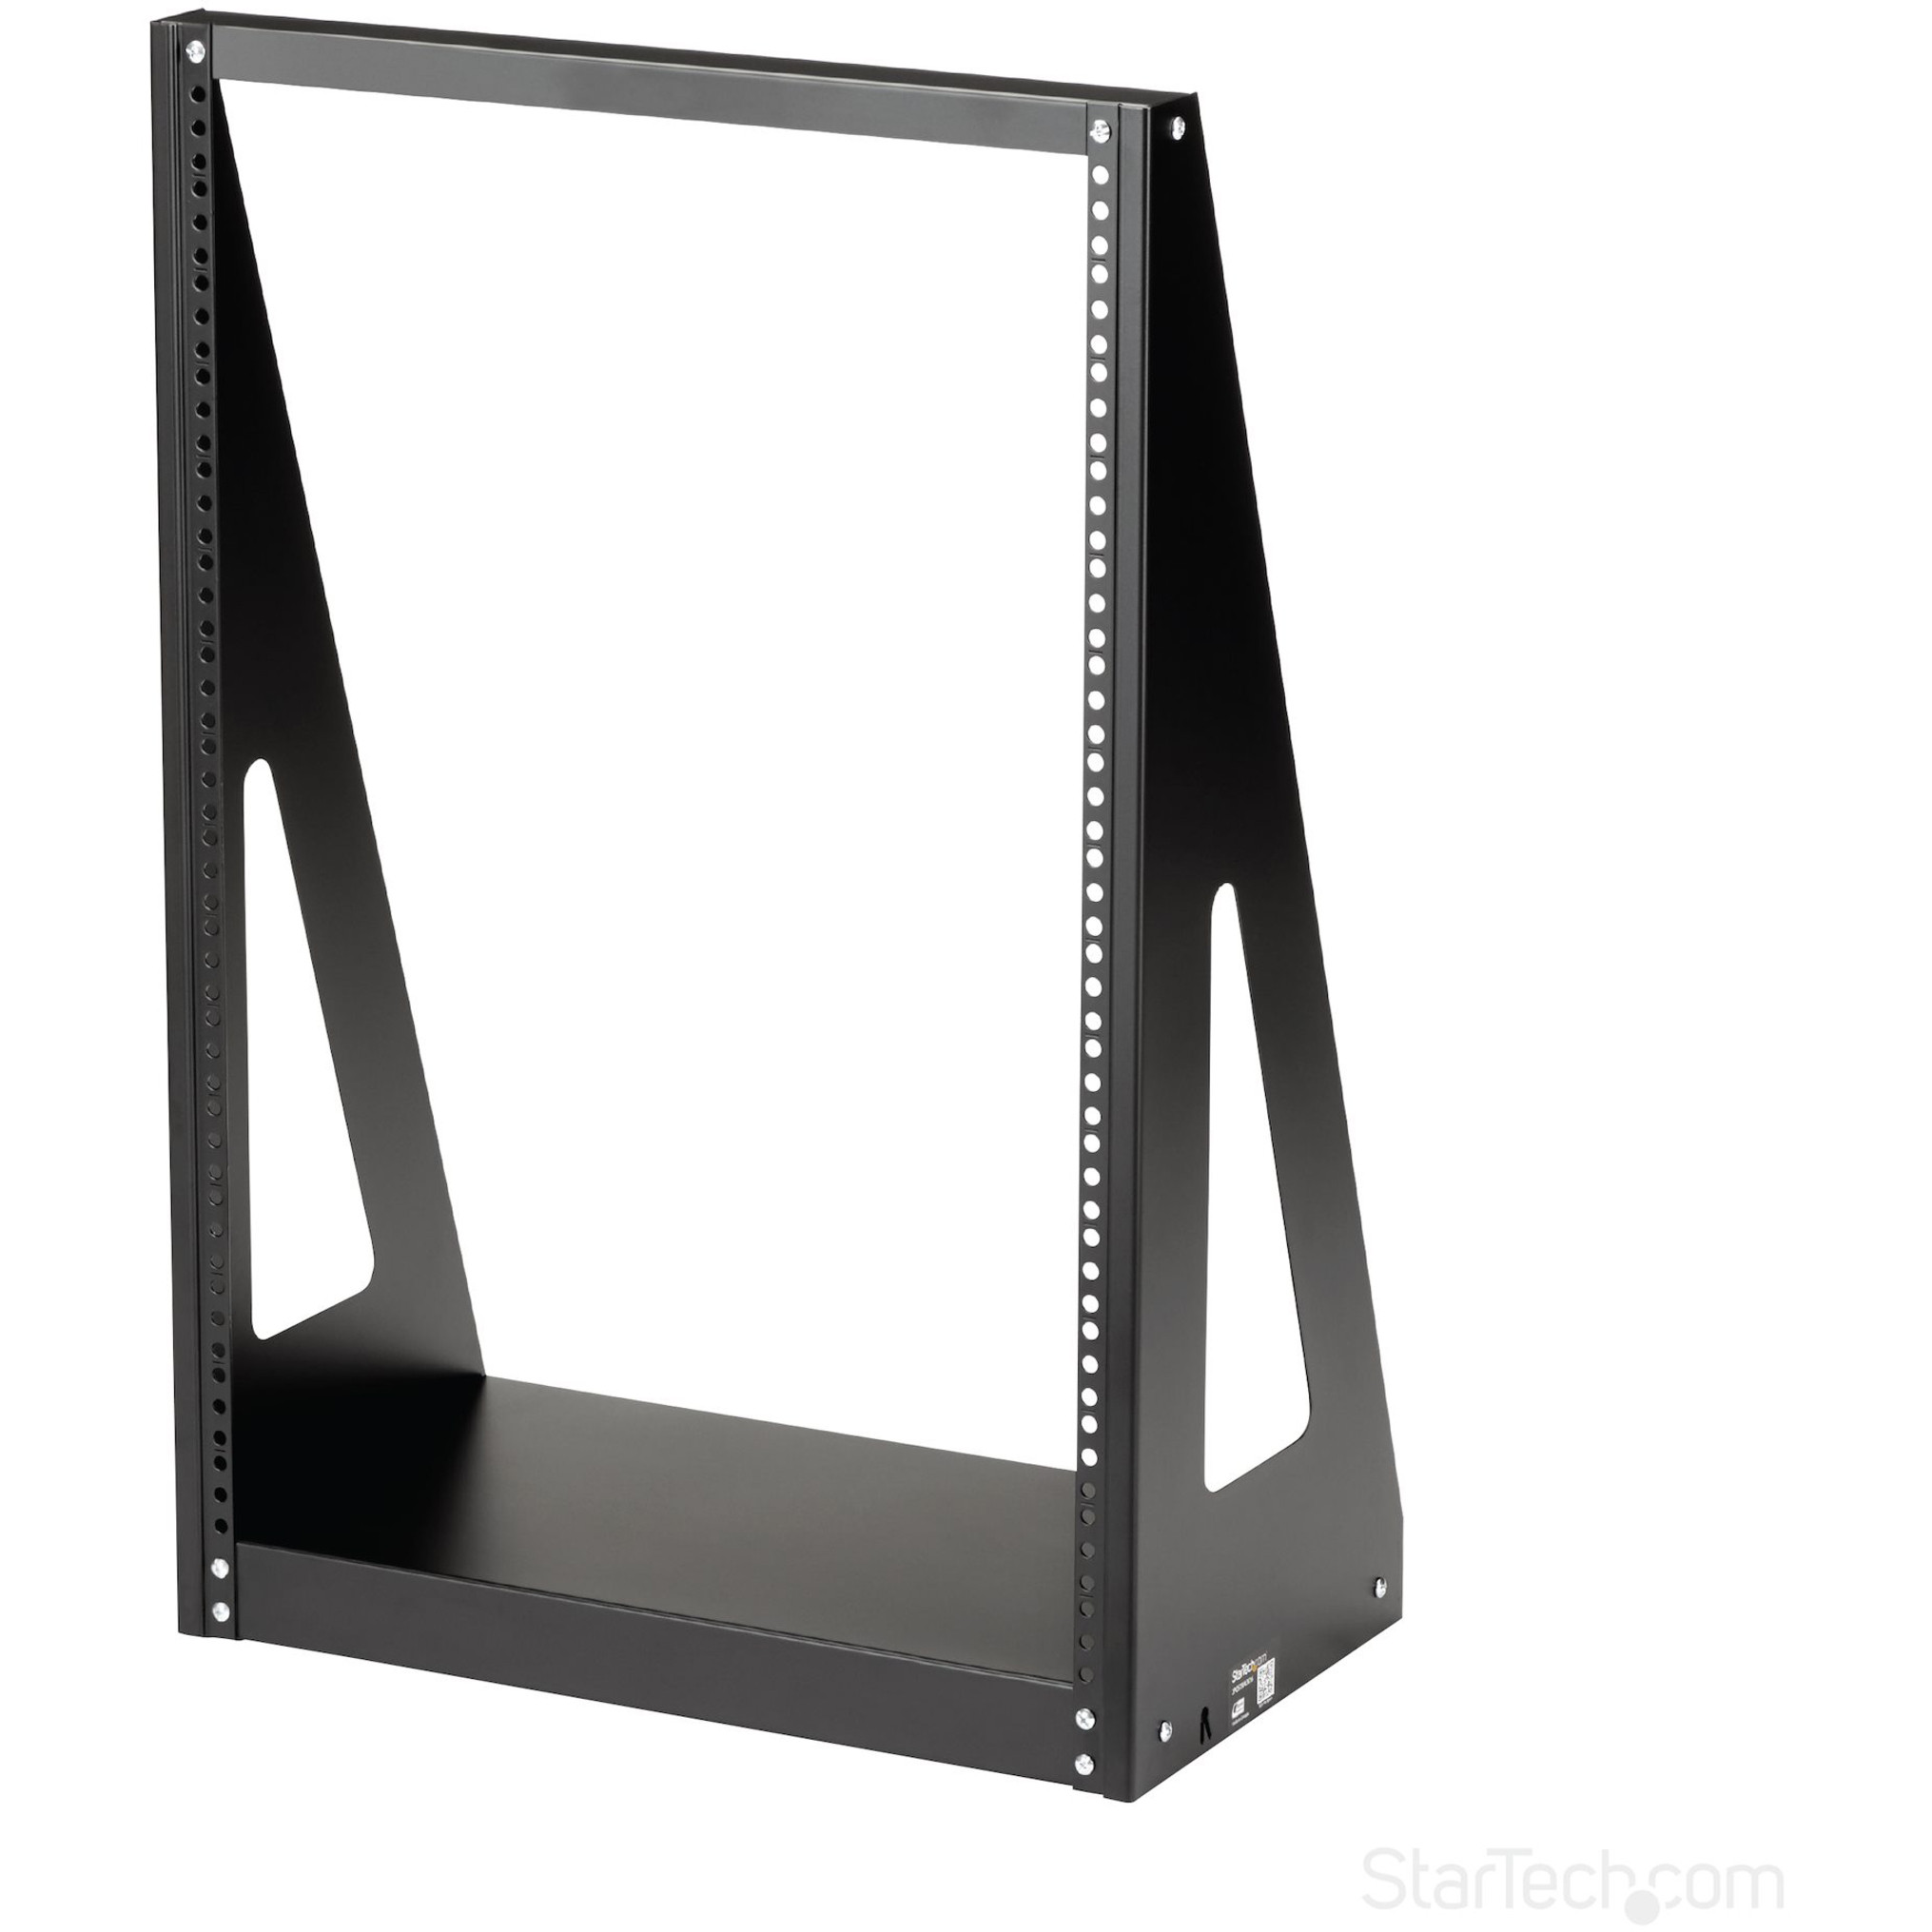 Startech .com Heavy Duty 2-Post RackOpen-Frame Server Rack16UStore your server, network and telecom devices in this sturdy steel, op… 2POSTRACK16